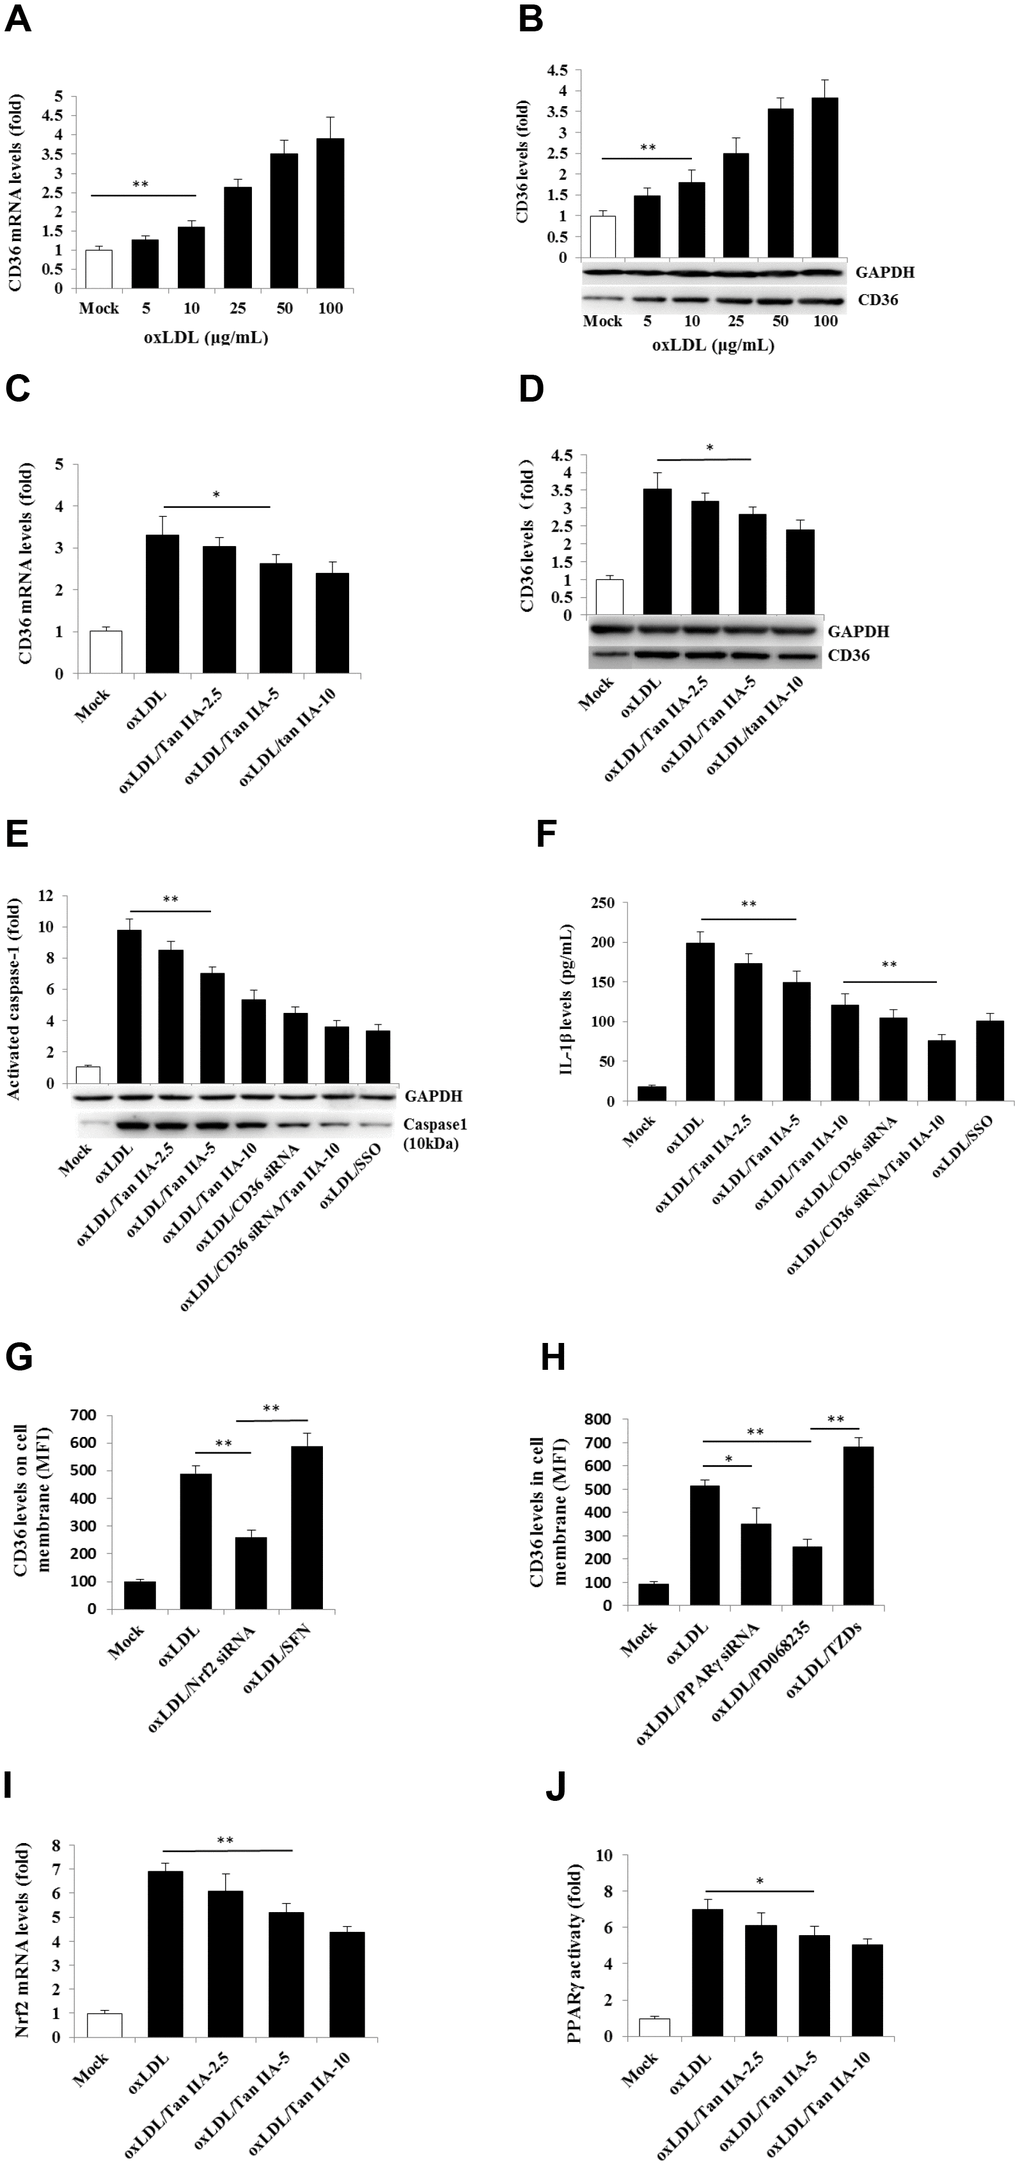 Tan IIA inhibits oxLDL-induced CD36 expression by inhibiting Nrf2 expression and PPARγ activity. (A, B) Effects of oxLDL on CD36 expressions at mRNA levels measured by qRT-PCR and protein levels detected by Western blot in macrophage, respectively; GAPDH, glyceraldehyde-3-phosphate dehydrogenase as an internal control. (C, D) Effects of Tan IIA on oxLDL-induced CD36 expressions at mRNA levels and protein levels in macrophages, respectively. (E) Effects of Tan IIA on oxLDL-induced caspase-1 activation in the cells detected by Western blot. (F) Effects of Tan IIA on oxLDL-induced IL-1β productions measured by ELISA in macrophages. (G, H) Effects of Nrf2 and PPARγ gene knockdown by siRNA on CD36 expression on the cell membrane, respectively, detected by flow cytometry, presented by mean fluorescence intensity (MFI). (I, J) Effects of Tan IIA on oxLDL-mediated Nrf2 expression measured by RT-PCR and oxLDL-mediated PPARγ activity measured by a commercial kit in the cells.